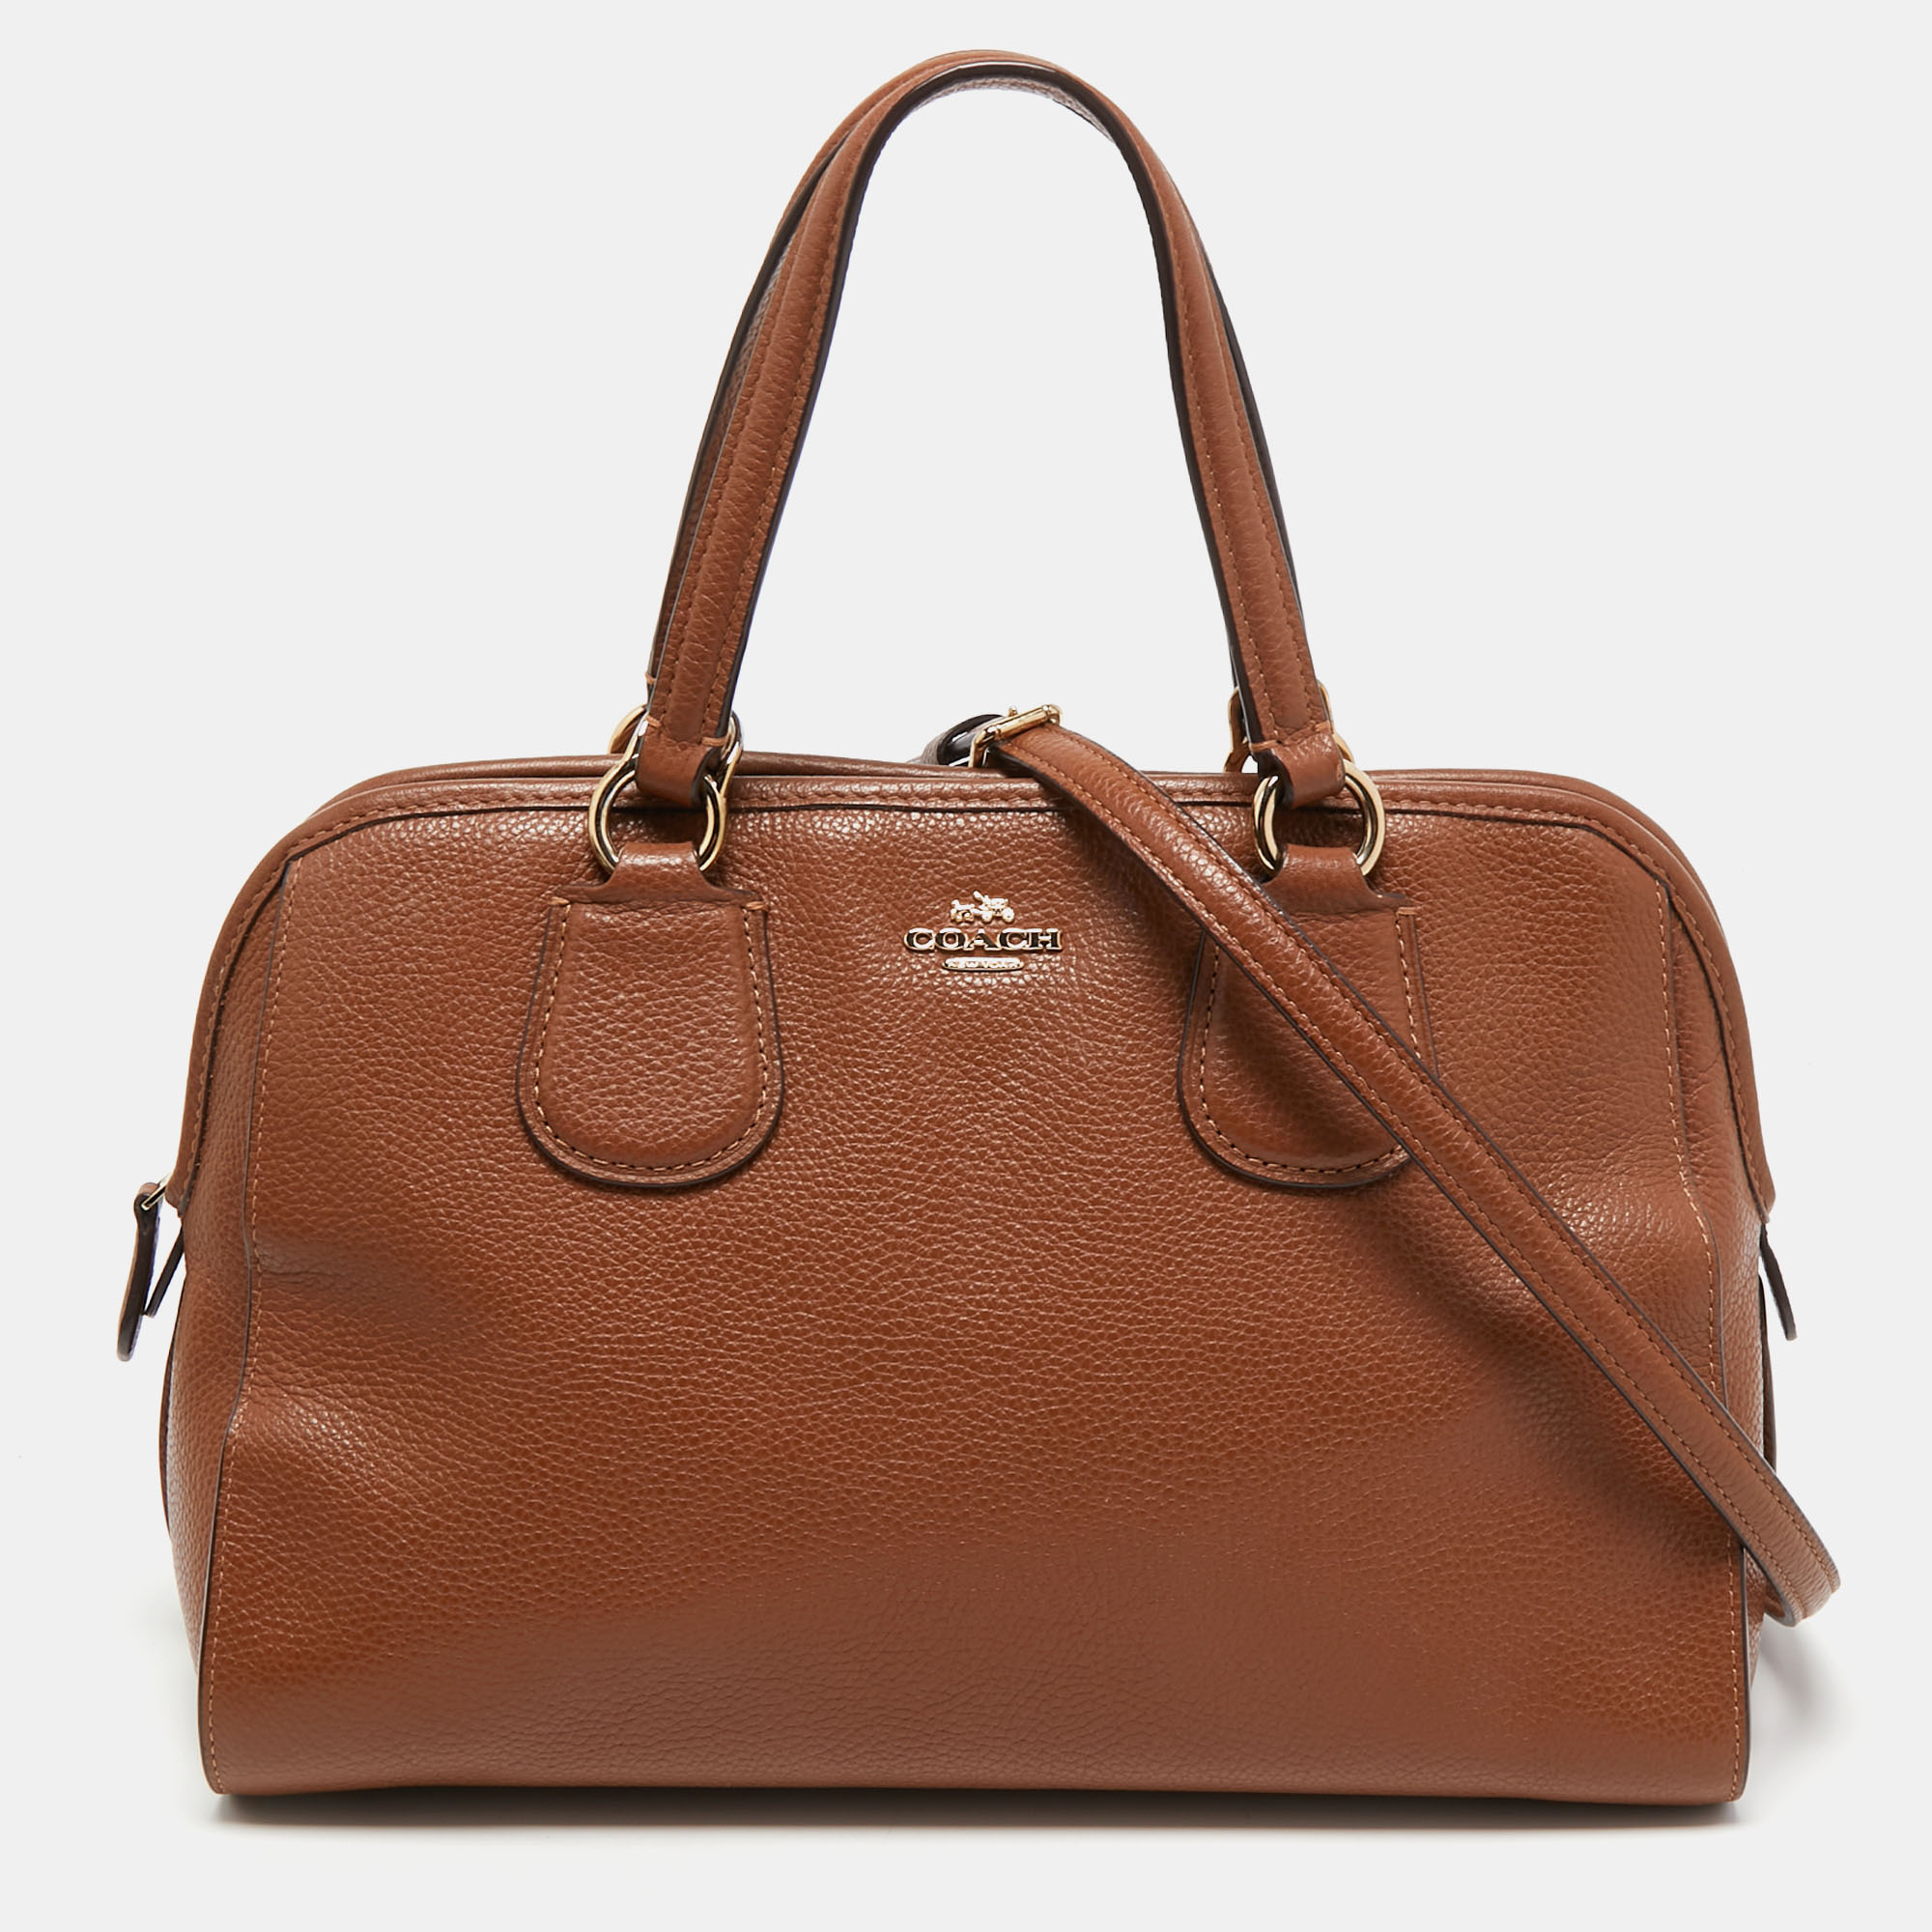 Pre-owned Coach Brown Leather Nolita Satchel